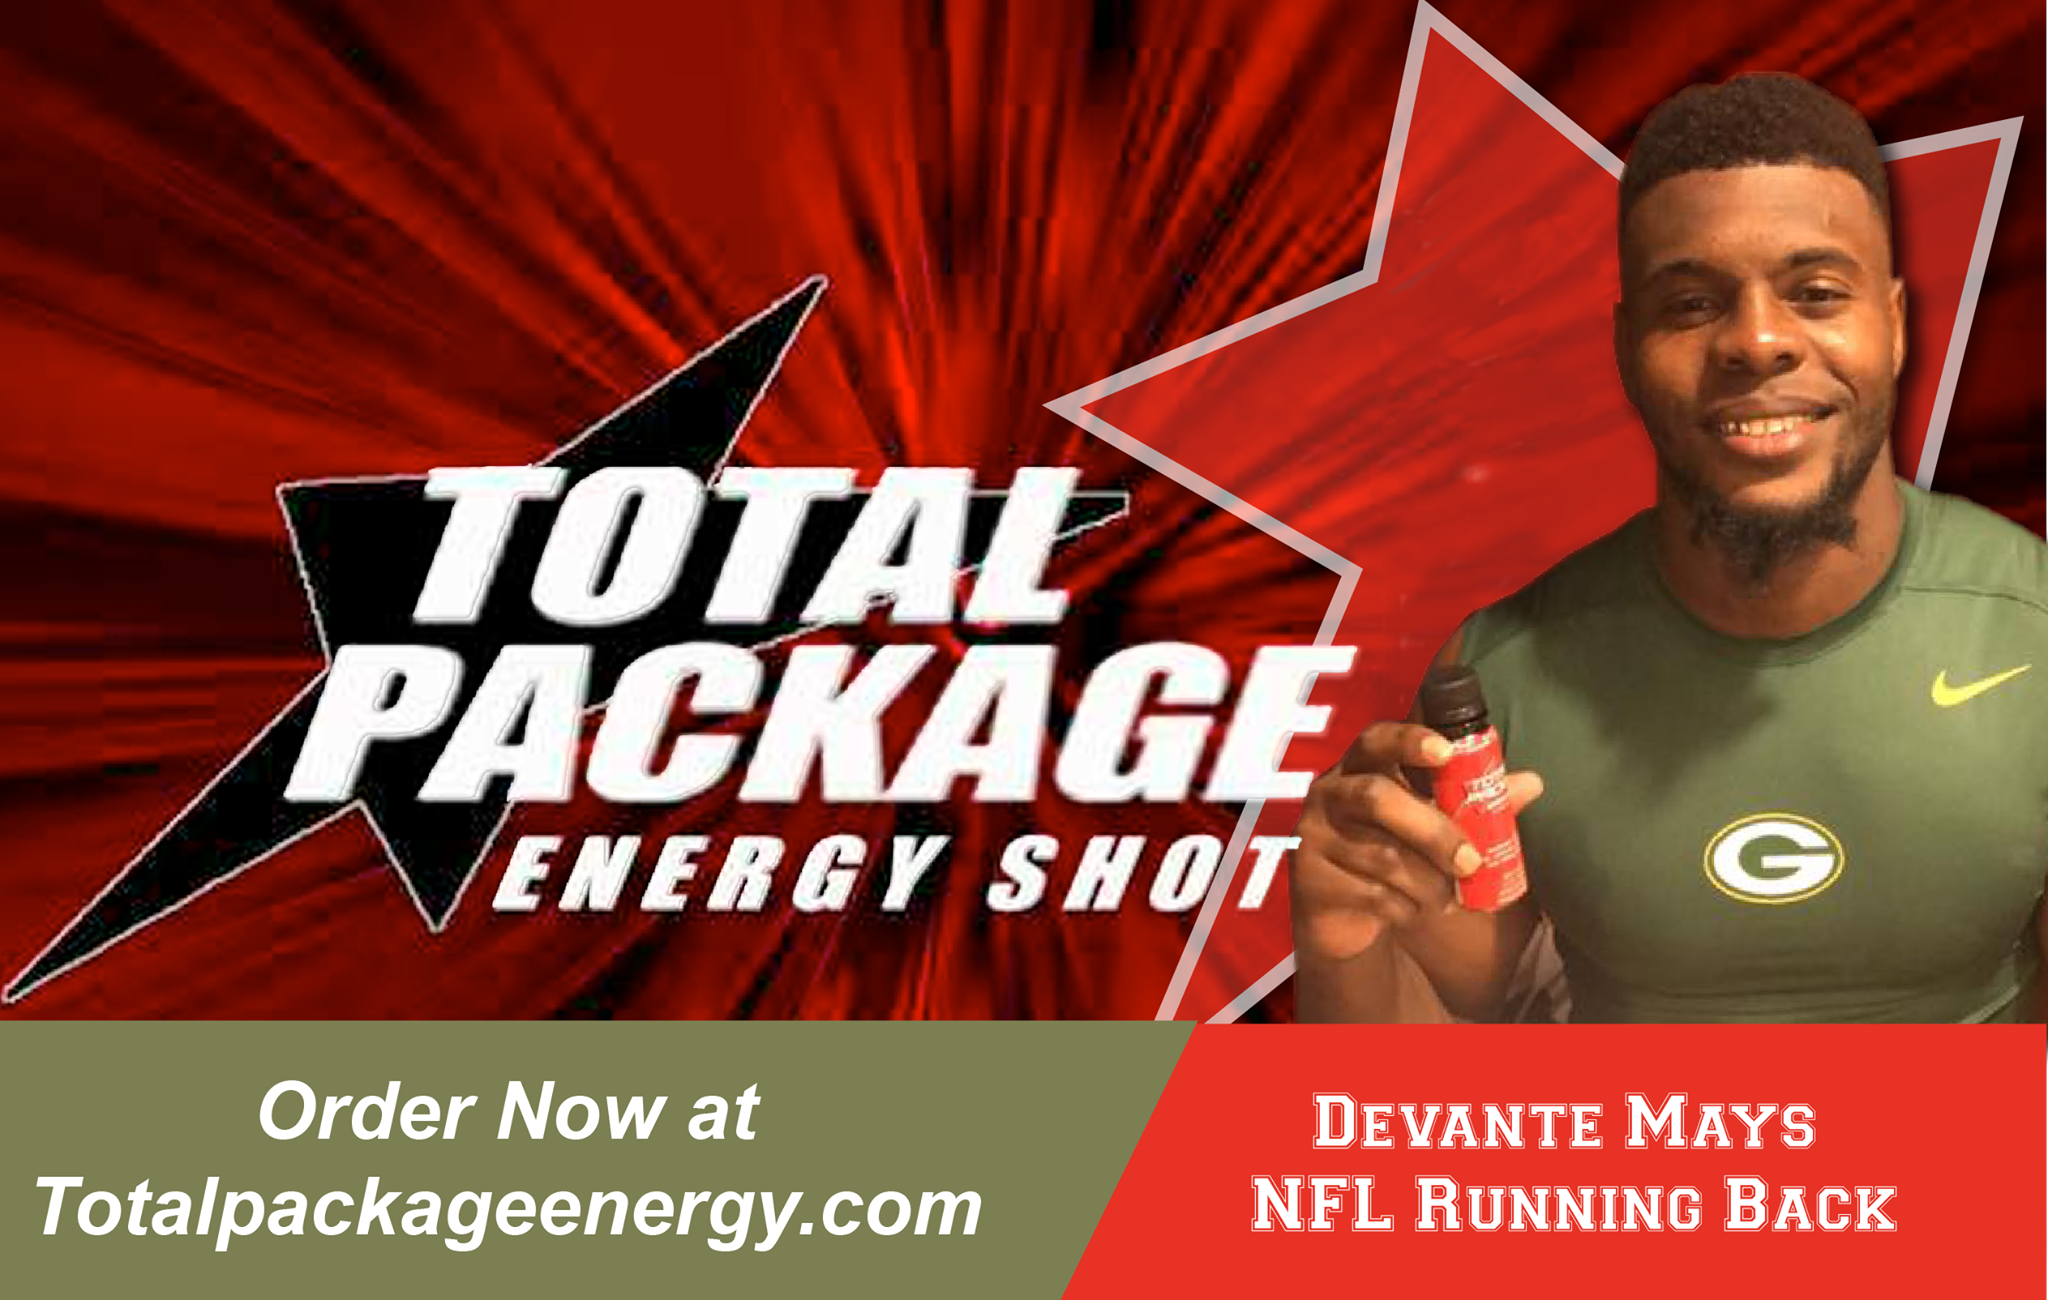 Total Package Energy Shot Order now at totalpackageenergy.com, be sure to put “AND SPORTS” in the Representative box